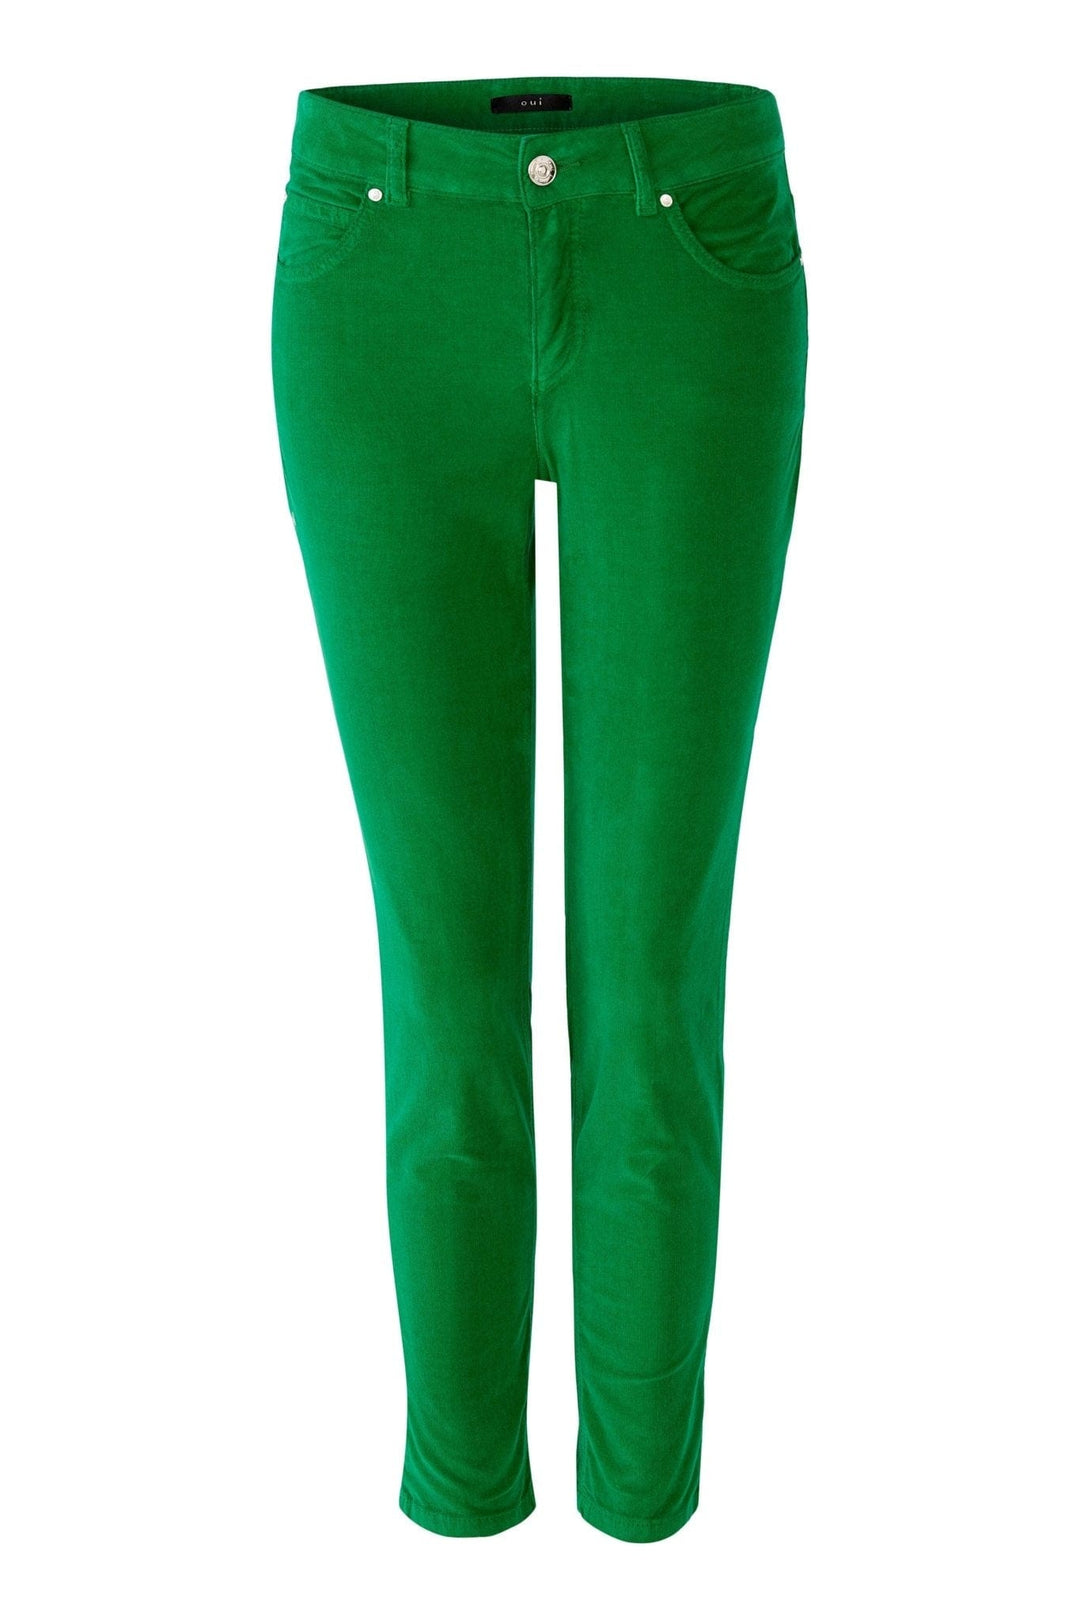 Oui 'Baxter' Slim Fit Cord Trousers In Green - Crabtree Cottage